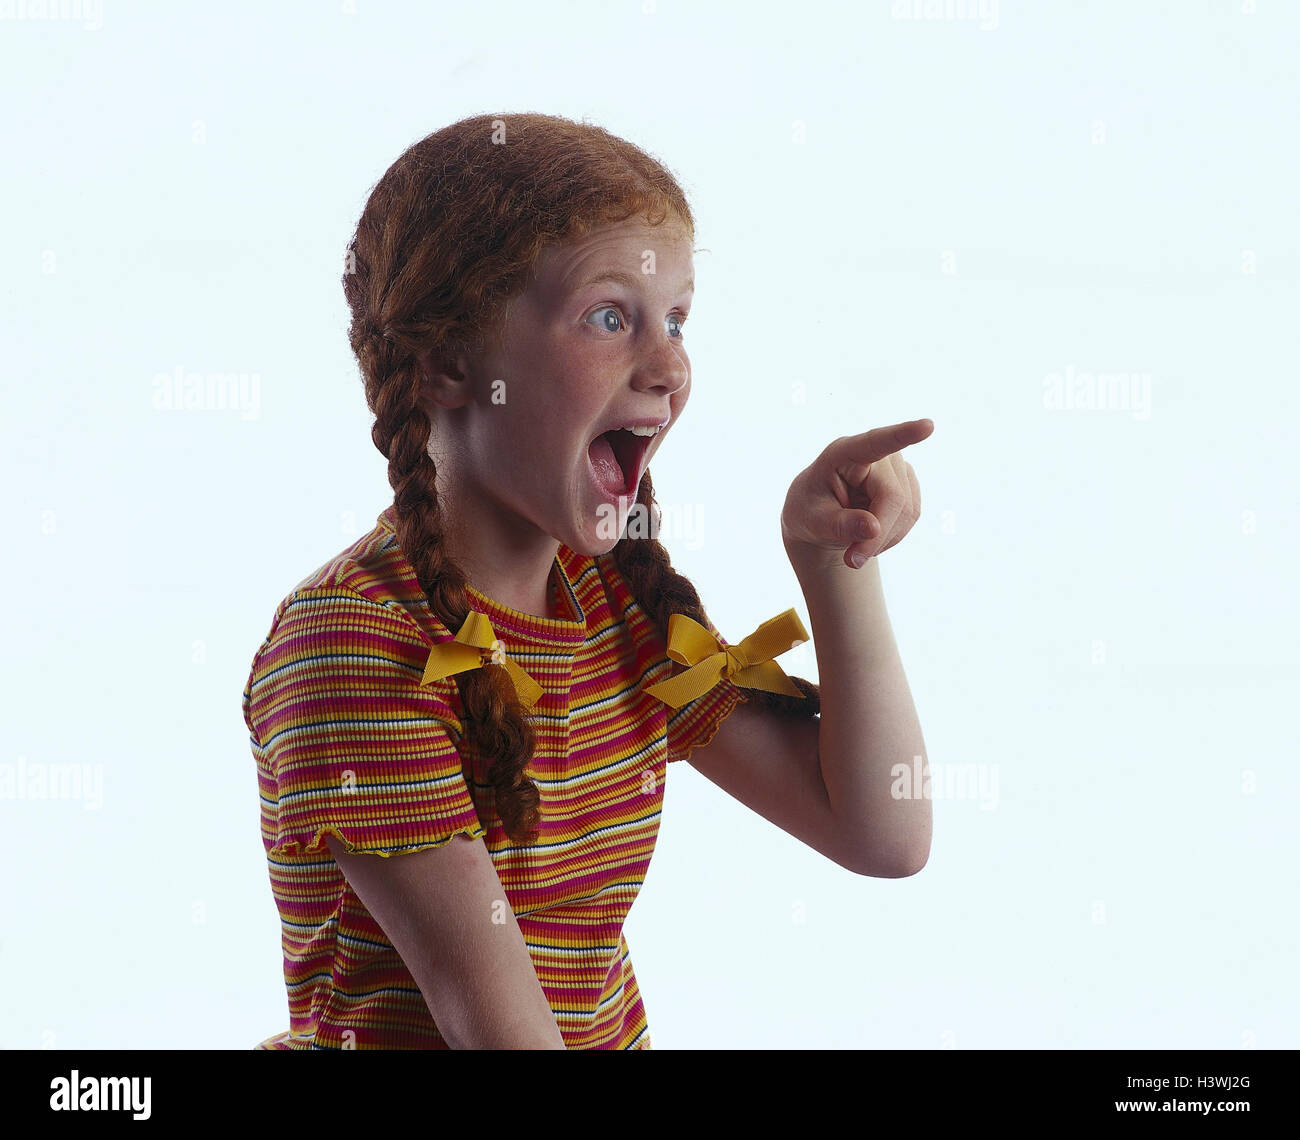 Girls, red-haired, plaits, indicate, shout, half portrait, side view, child, freckles, positive mood, enthusiasm, joy, surprise, shout, astonished, surprises, attention, joy, malicious pleasure, finish laughing, there laugh, childhood, studio, cut outs, Stock Photo